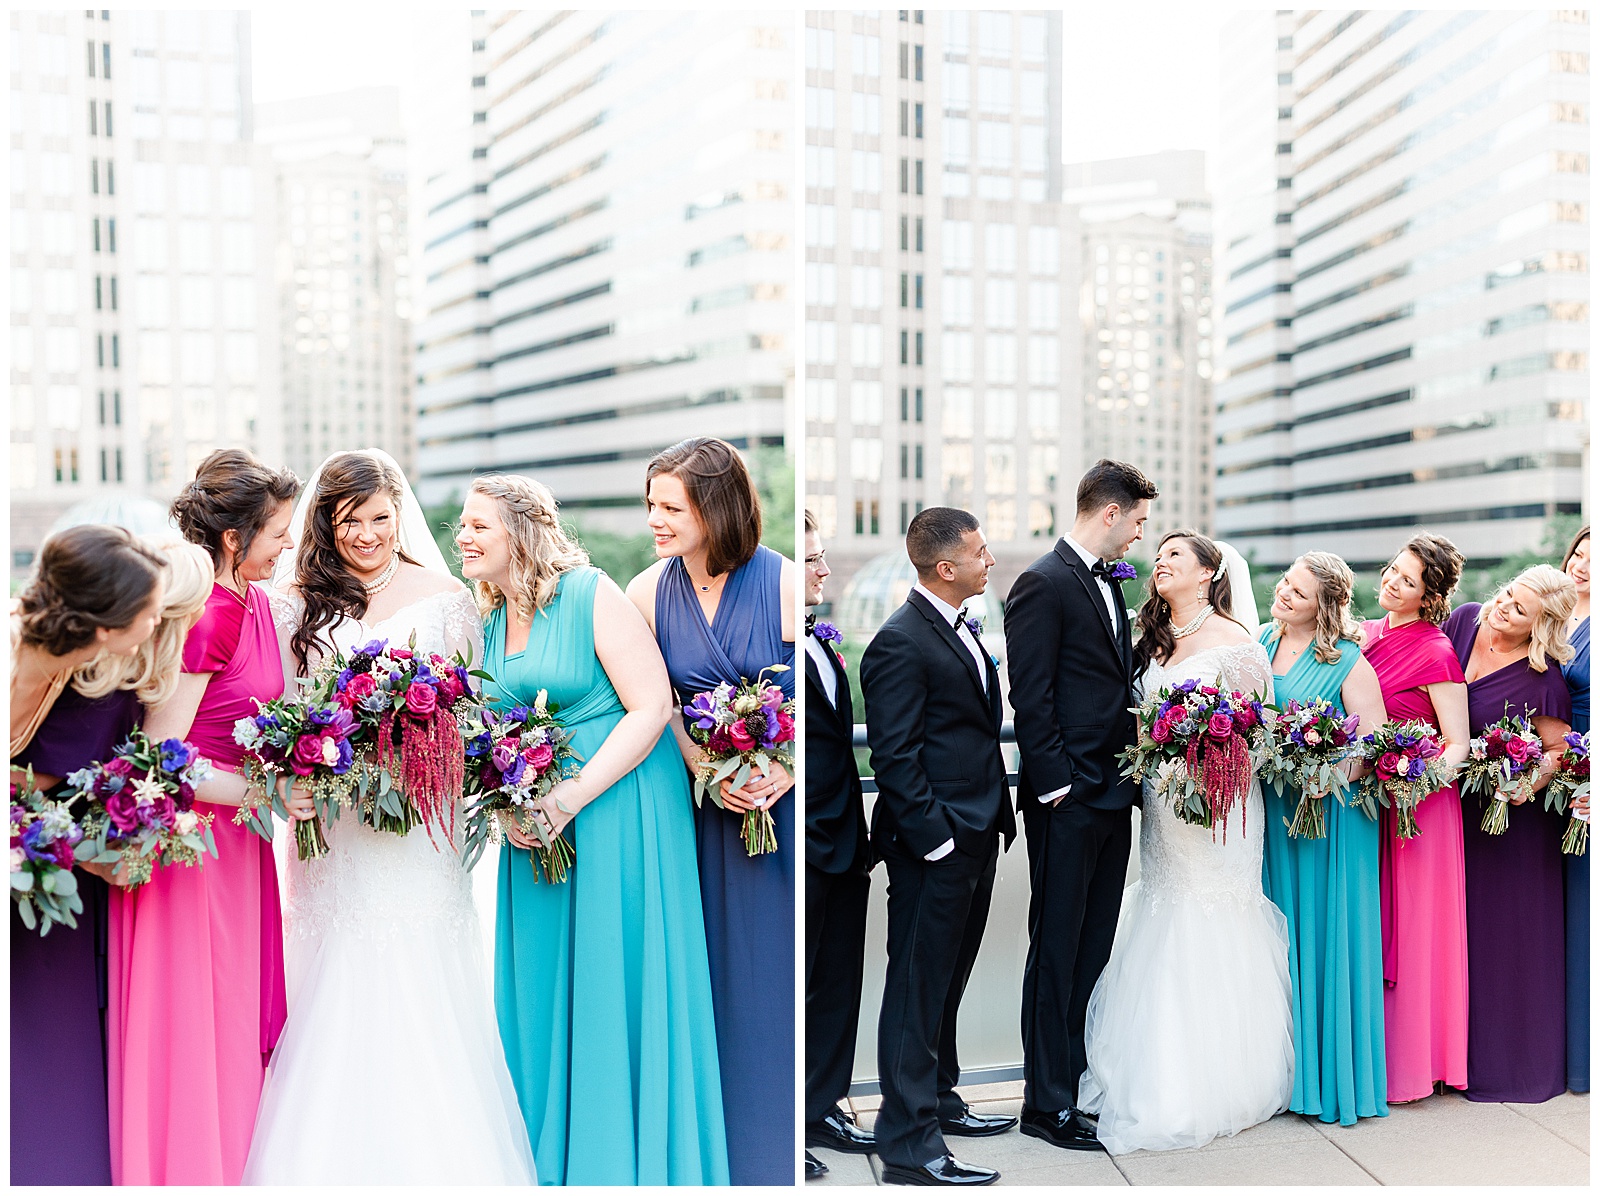 💍 bride groom wedding party group photo outdoor wedding portraits in front of city buildings downtown 👰 Bride: lace wedding dress with rhinestone belt rhinestone barrette in hair down with pearls 🤵 Groom: black tux tuxedo and purple flower boutonnière 💍 Bright Colorful Summer City Wedding in Charlotte, NC with Taryn and Ryan | Kevyn Dixon Photography